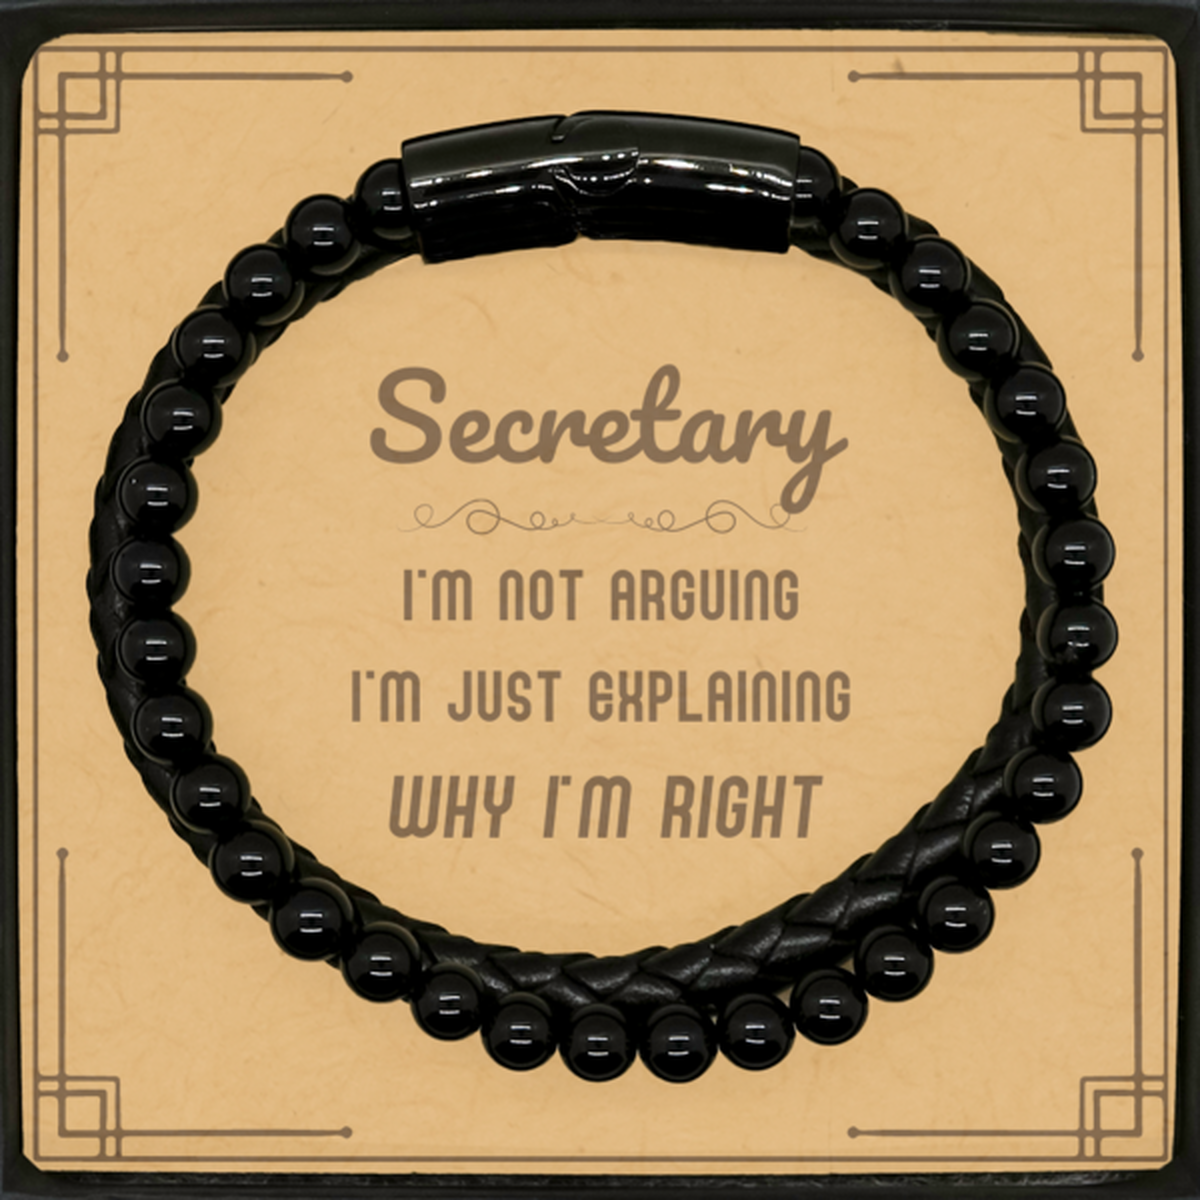 Secretary I'm not Arguing. I'm Just Explaining Why I'm RIGHT Stone Leather Bracelets, Funny Saying Quote Secretary Gifts For Secretary Message Card Graduation Birthday Christmas Gifts for Men Women Coworker